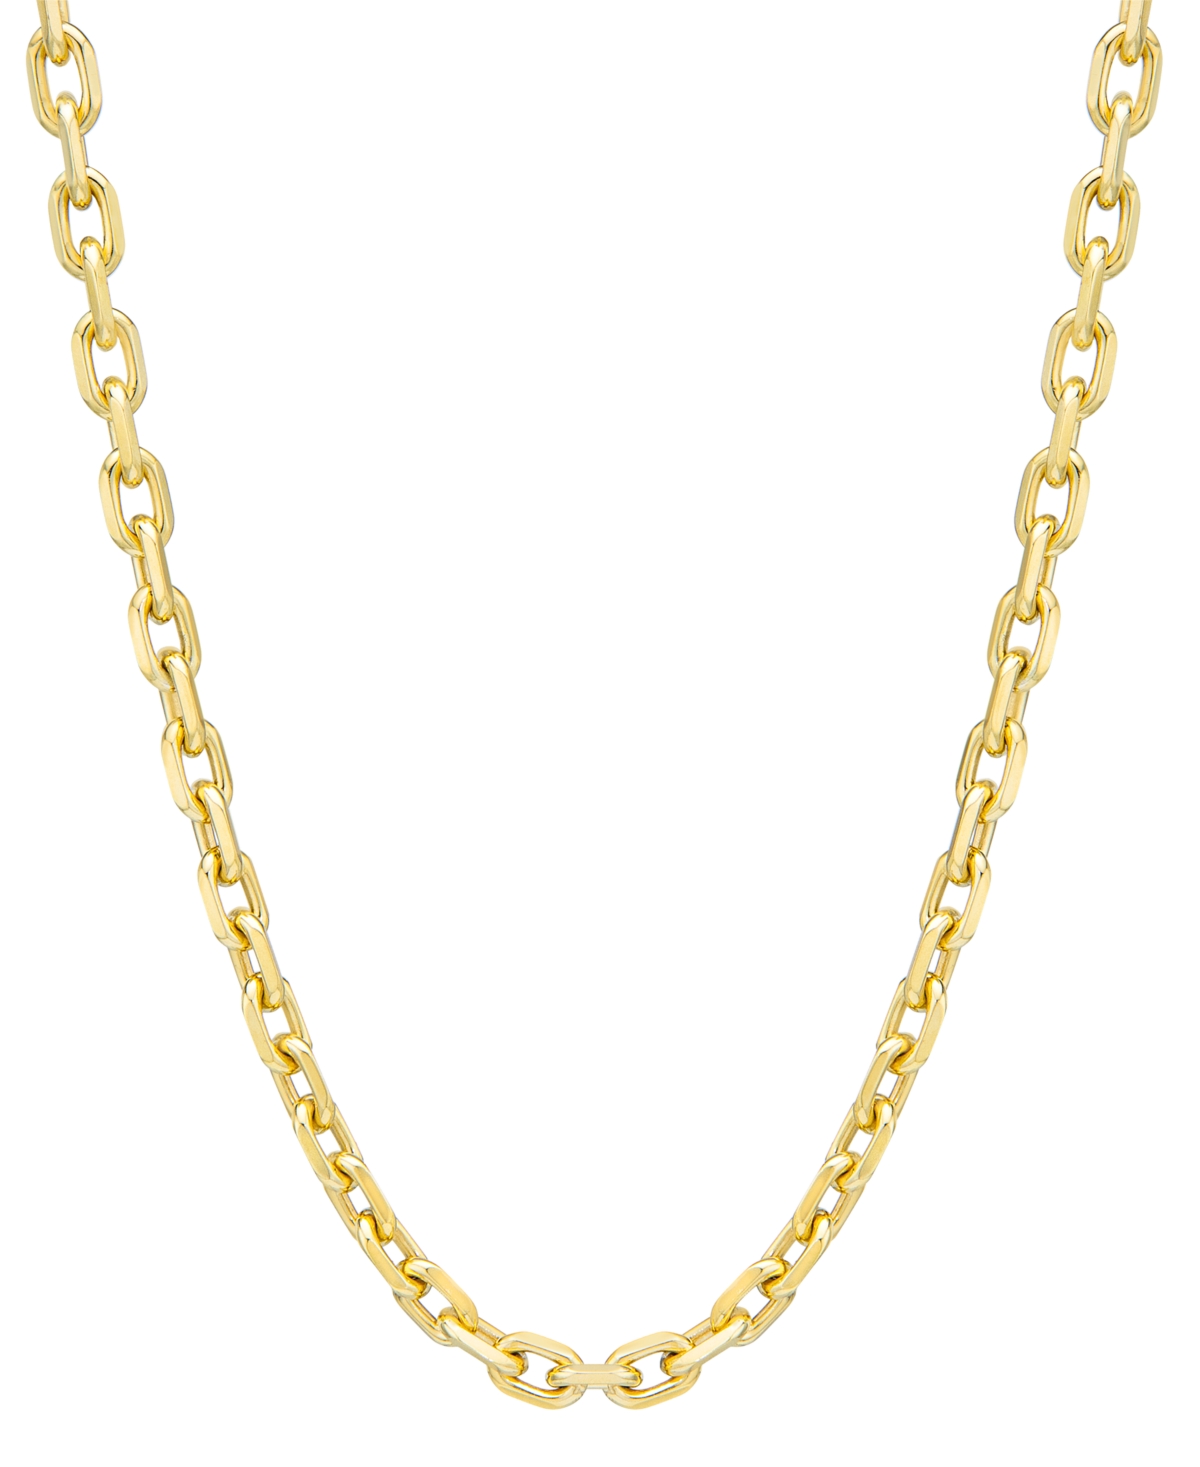 Men's Rolo Link 22" Chain Necklace in 14k Gold-Plated Sterling Silver - Gold Over Silver